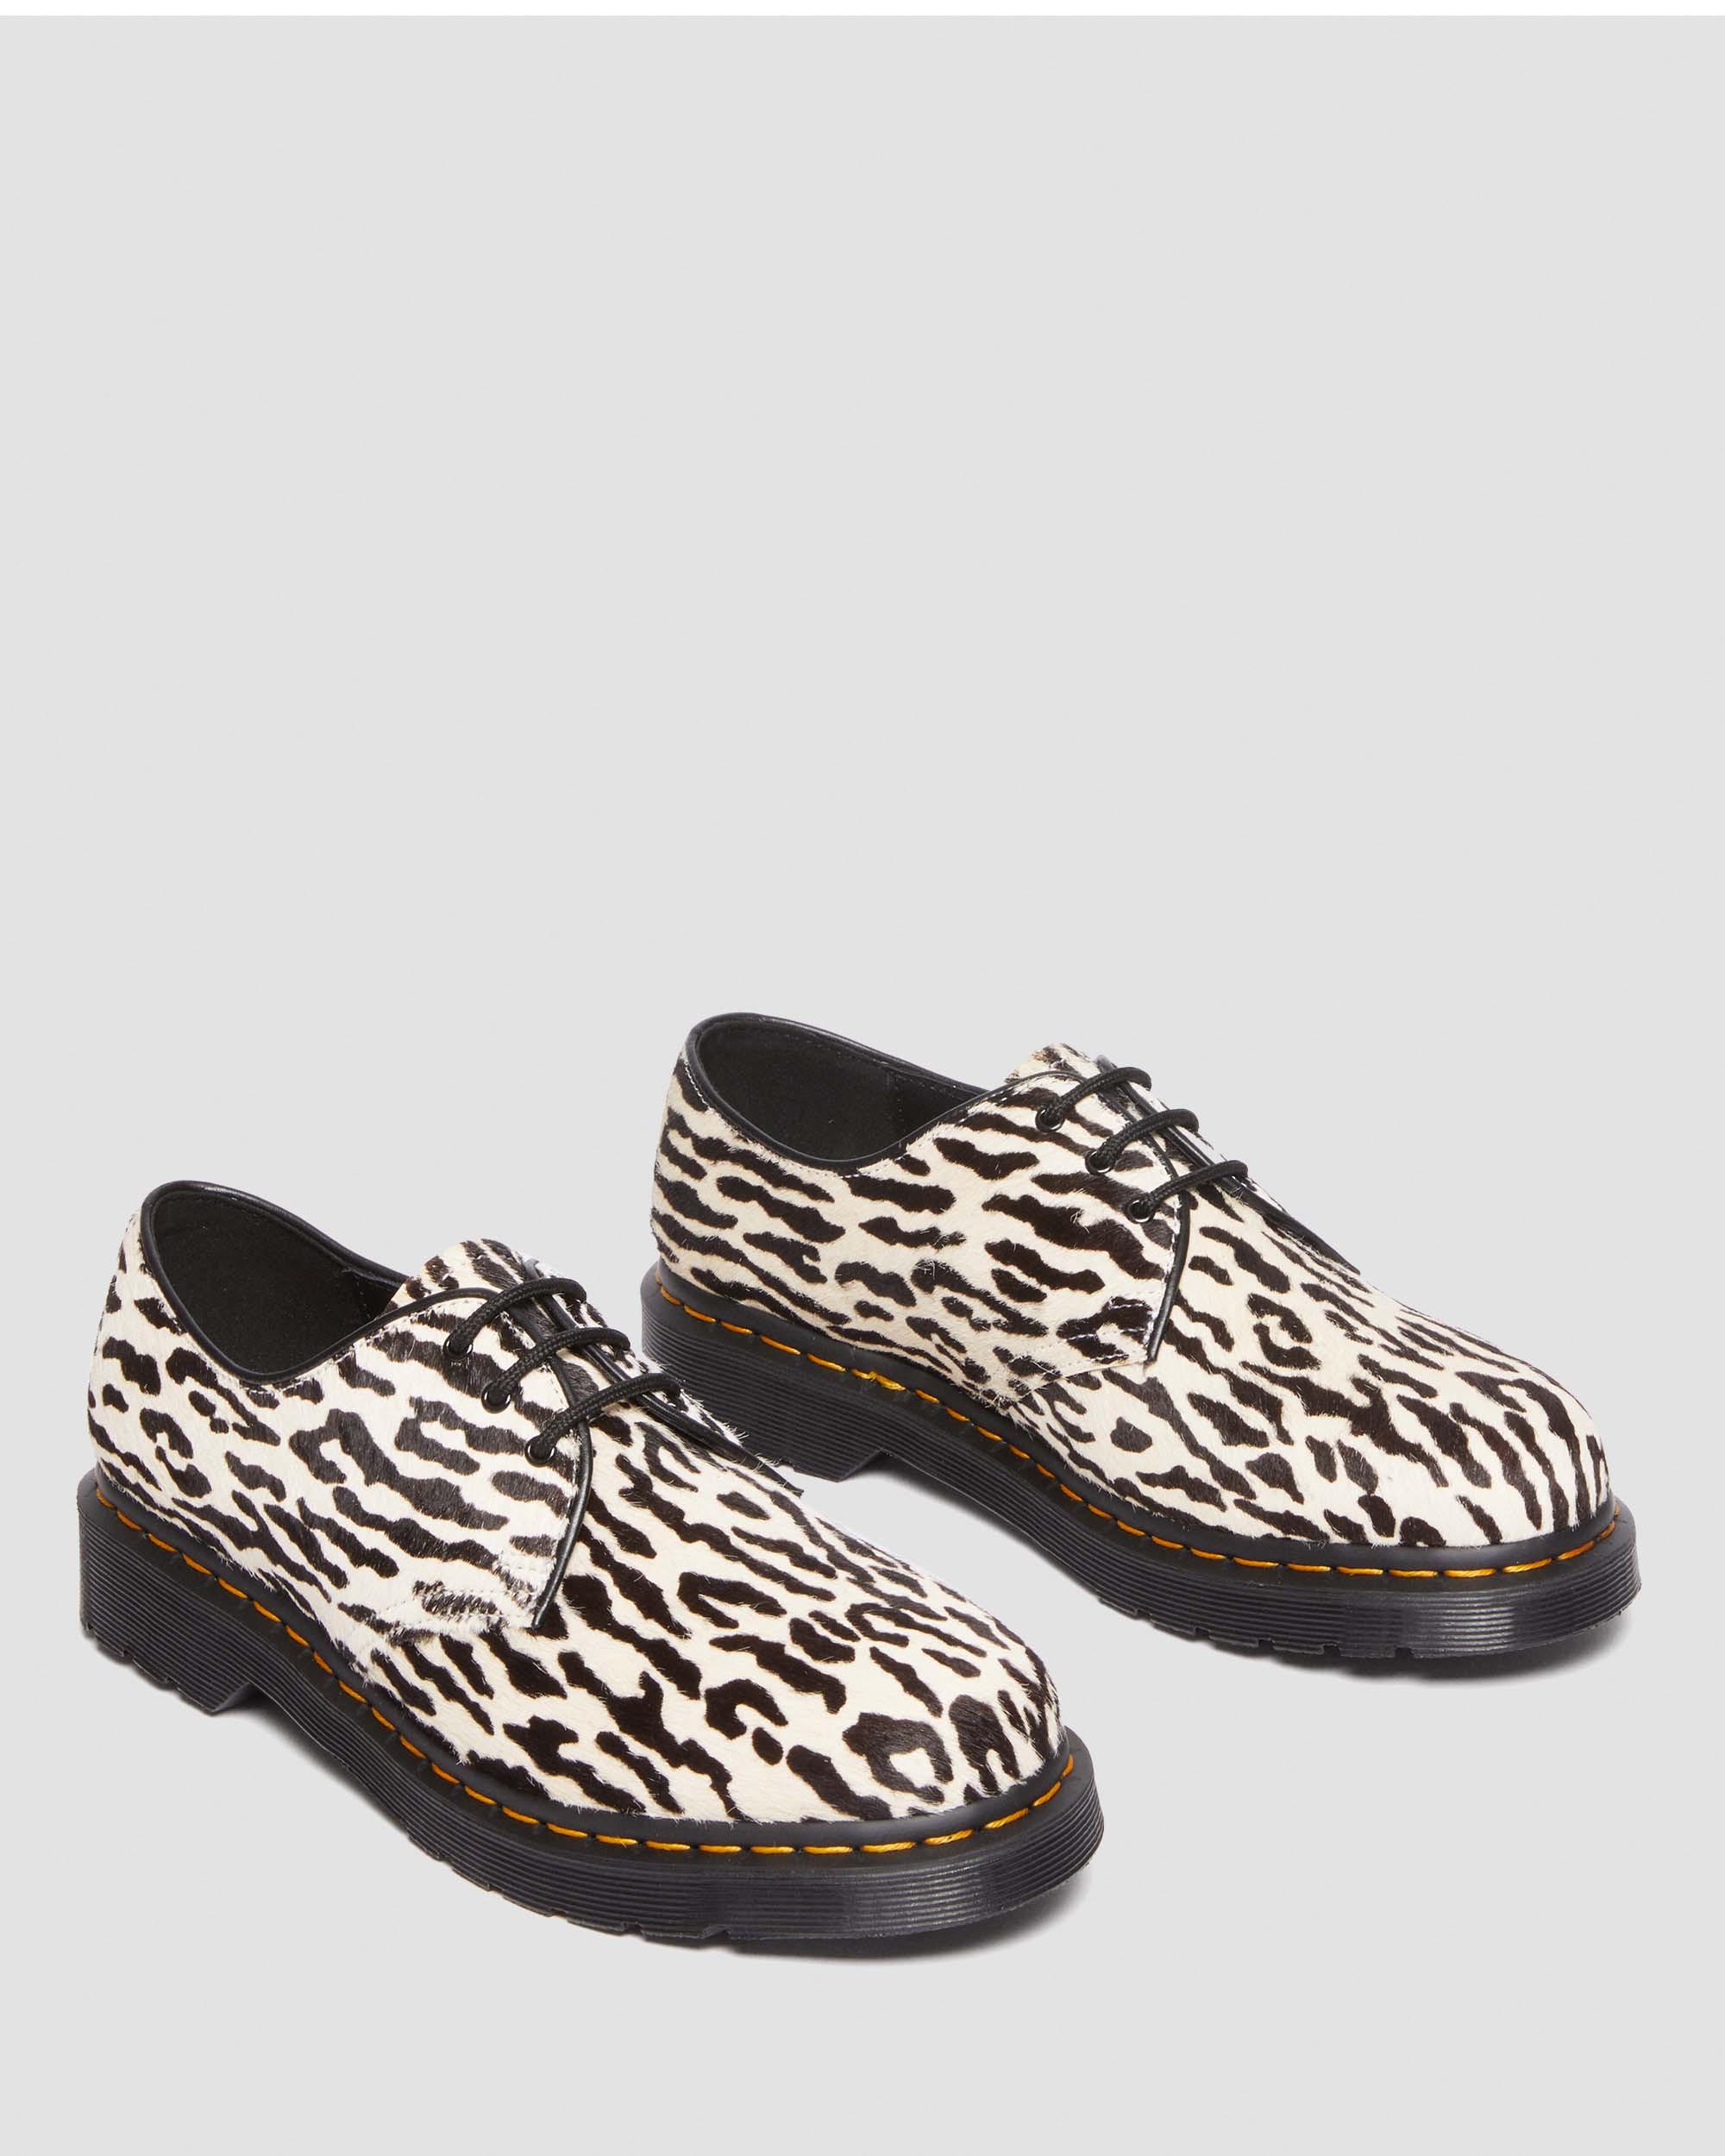 1461 Wacko Maria Hair-On Oxford Shoes | Dr. Martens